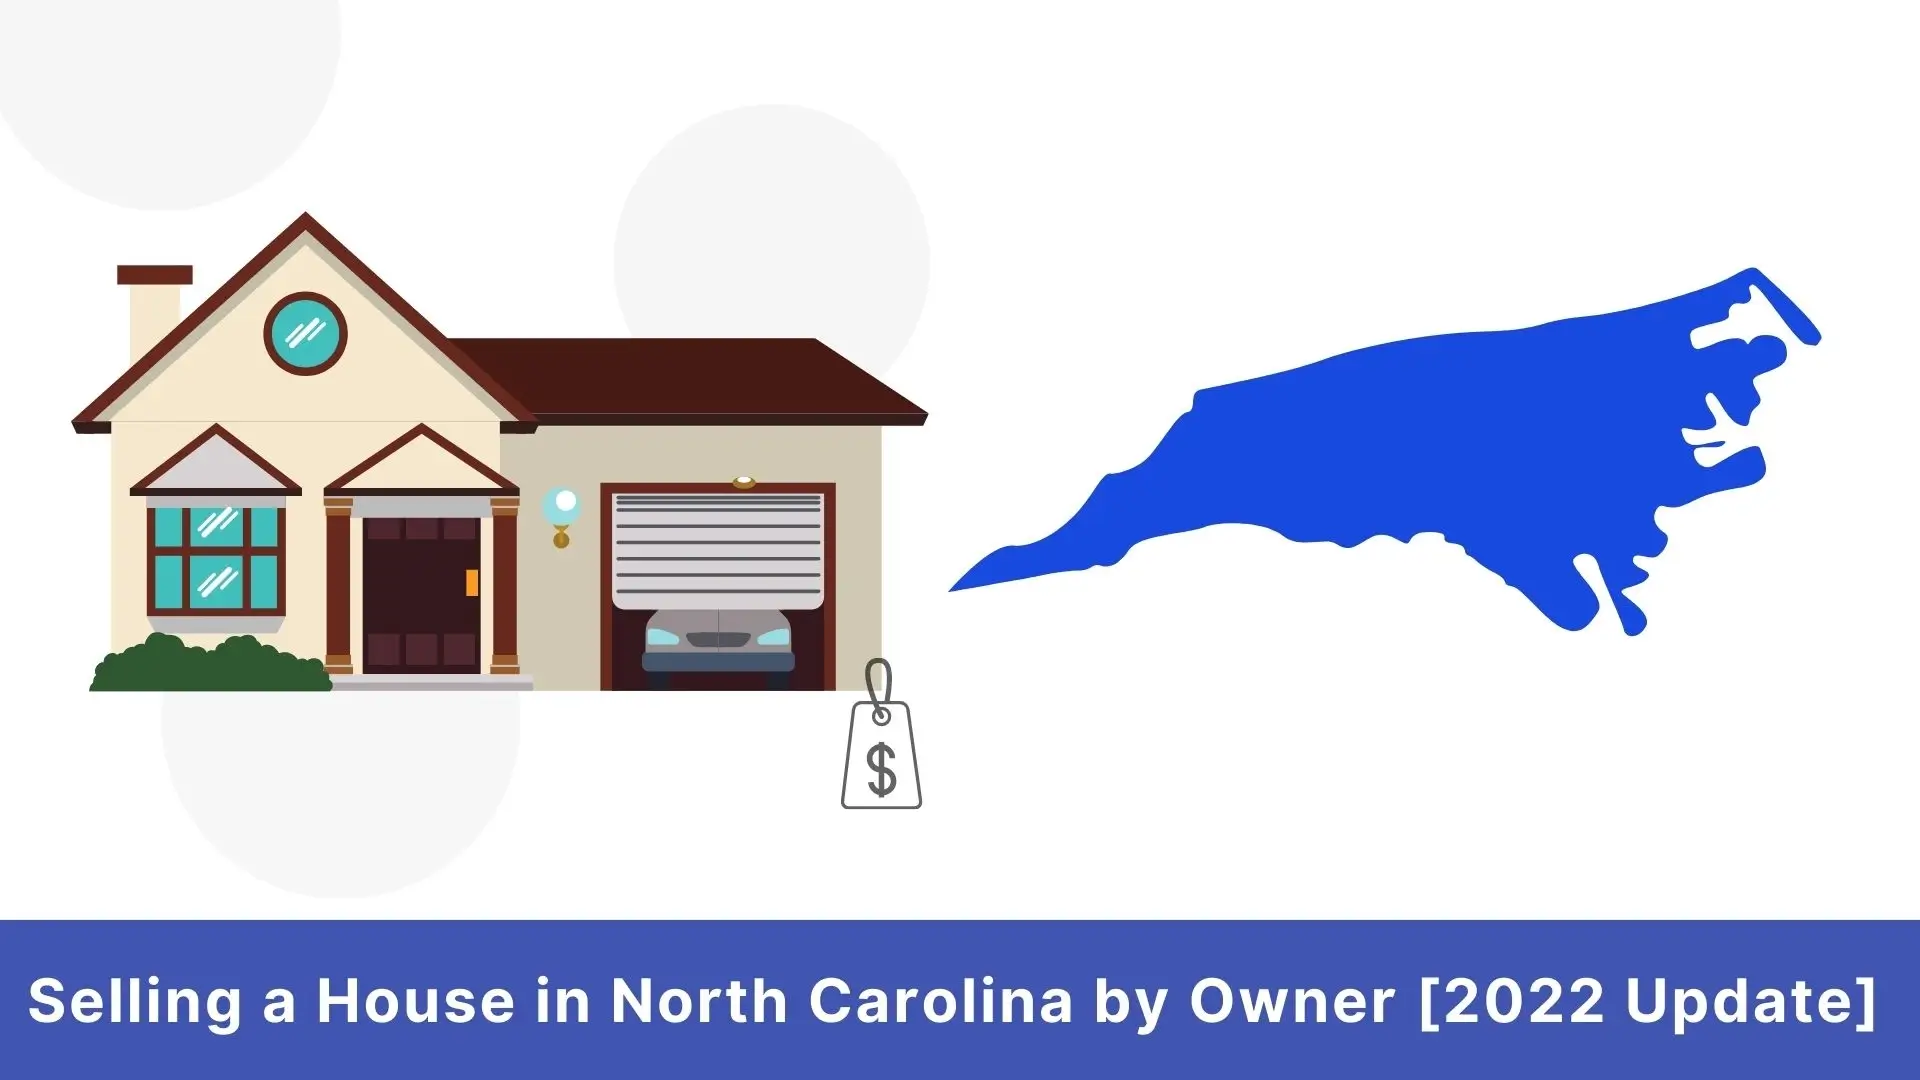 Selling a house in North Carolina by owner